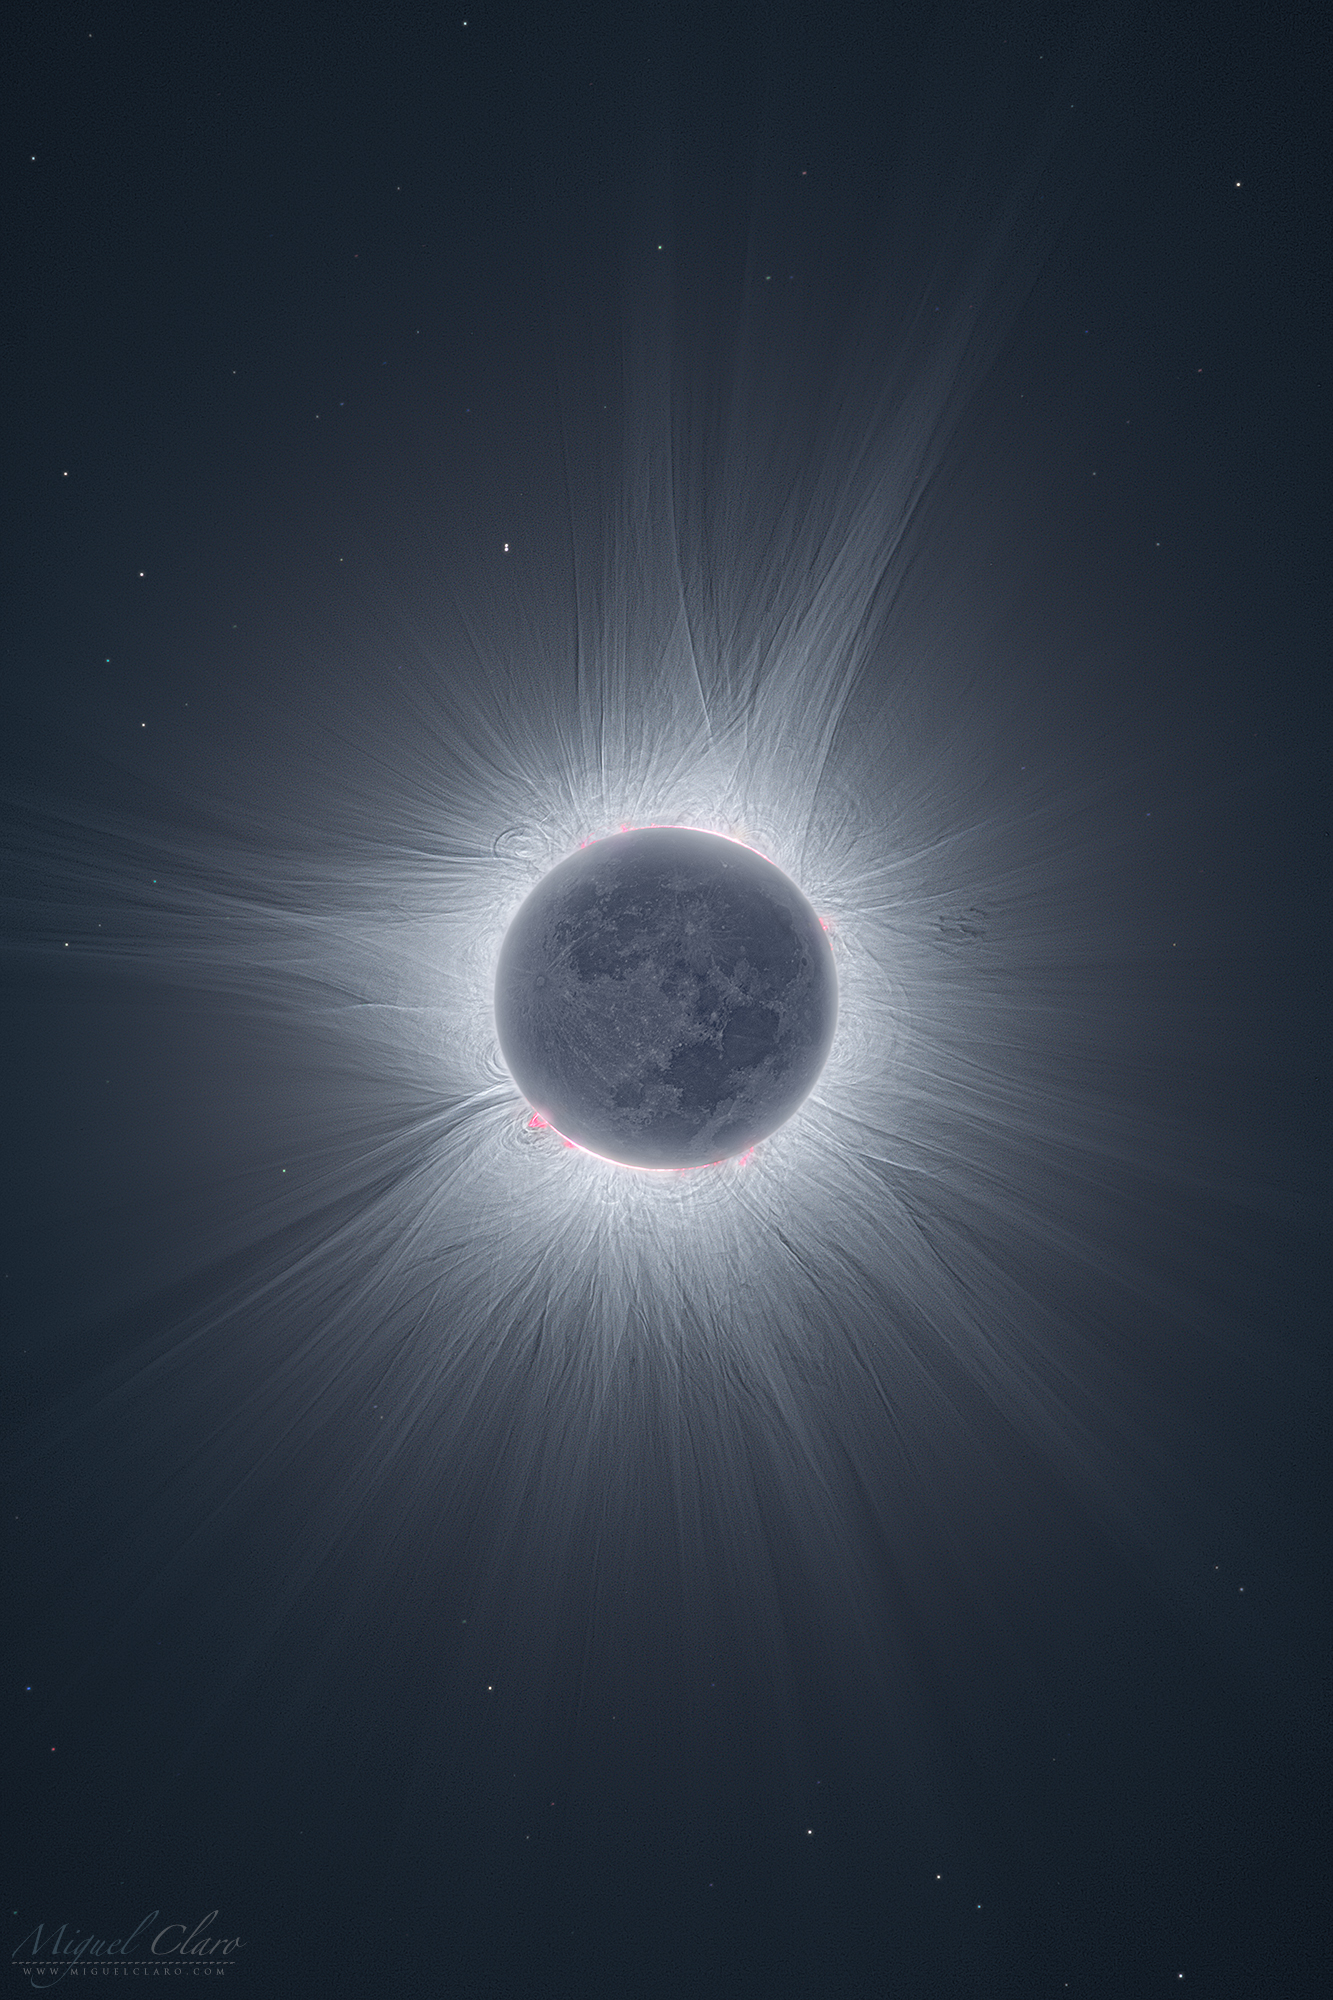 a dimly shadowed moon blocks the sun as eruptions of light stretch from the starry body behind the Earth satellite.